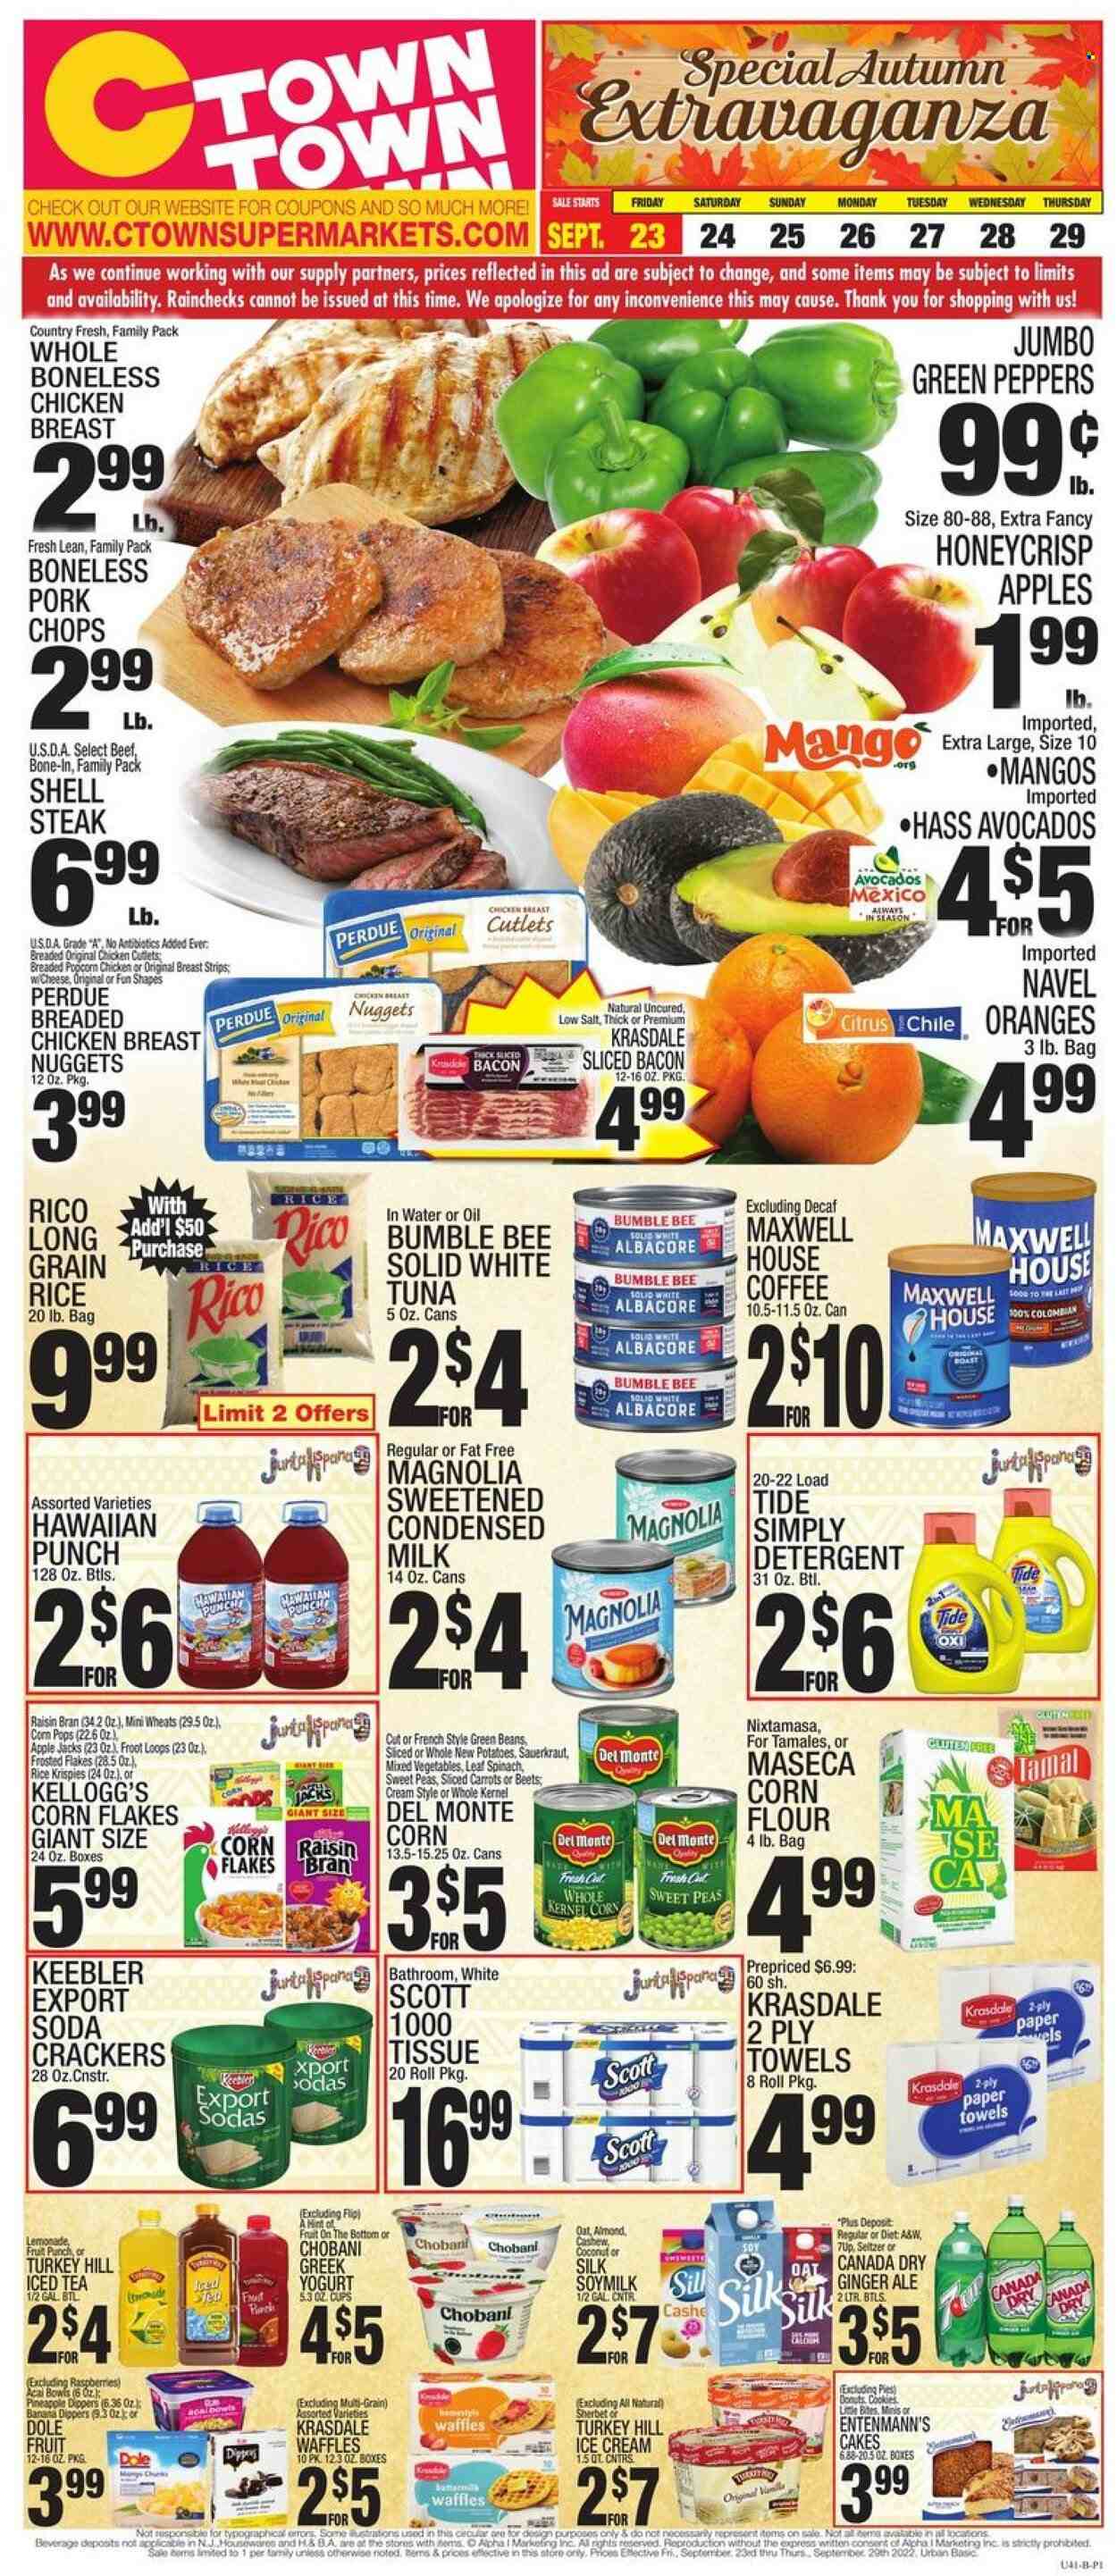 thumbnail - C-Town Flyer - 09/23/2022 - 09/29/2022 - Sales products - cake, donut, waffles, Entenmann's, carrots, green beans, spinach, potatoes, Dole, peppers, apples, avocado, mango, pineapple, oranges, coconut, tuna, nuggets, Bumble Bee, fried chicken, chicken nuggets, Perdue®, bacon, greek yoghurt, Chobani, buttermilk, soy milk, condensed milk, Silk, ice cream, sherbet, mixed vegetables, strips, cookies, crackers, Kellogg's, Keebler, popcorn, flour, oats, corn flour, sauerkraut, Del Monte, corn flakes, Rice Krispies, Frosted Flakes, Corn Pops, Raisin Bran, long grain rice, Canada Dry, ginger ale, lemonade, ice tea, 7UP, A&W, fruit punch, seltzer water, soda, Maxwell House, coffee, chicken cutlets, beef meat, steak, sirloin steak, pork chops, pork meat. Page 1.